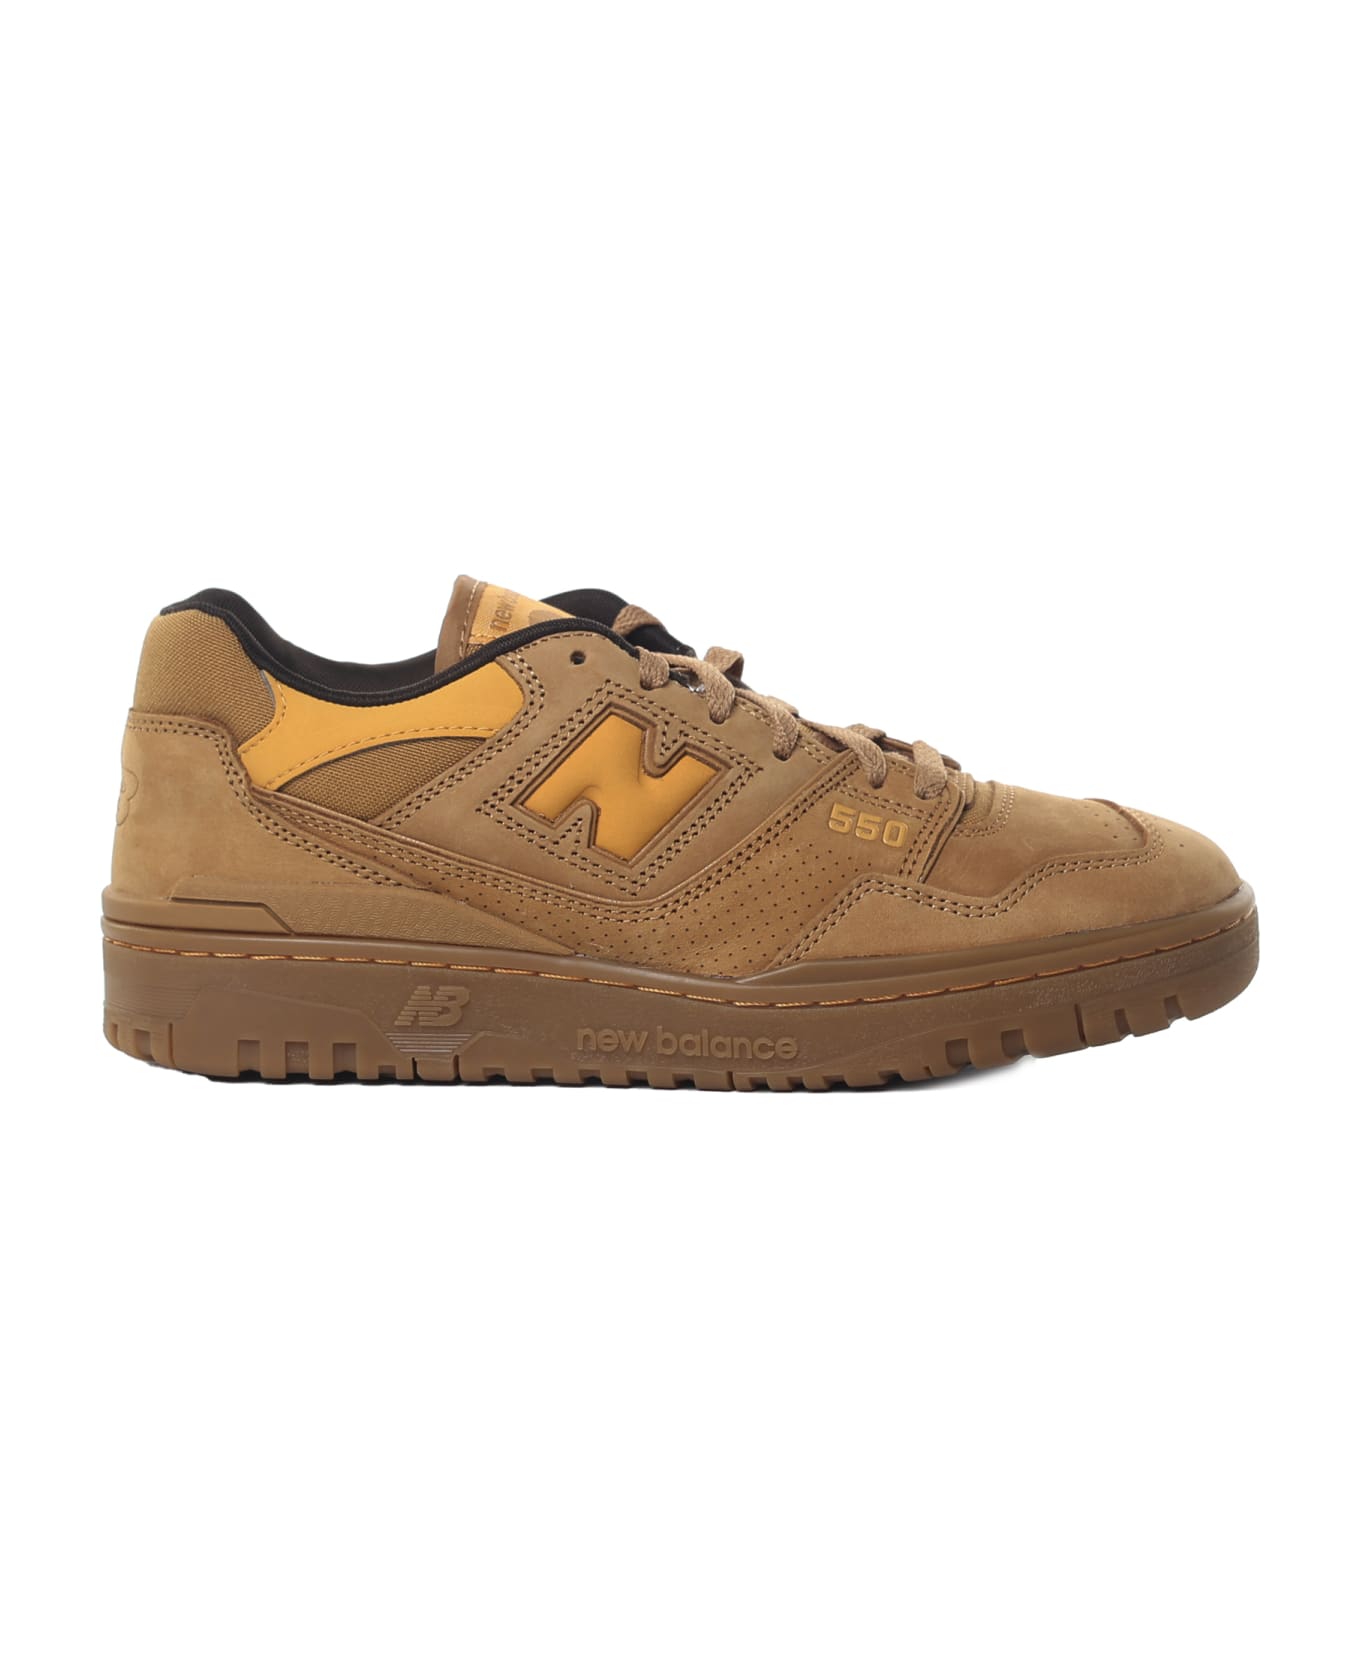 New Balance Sneakers Bb550 - Canyon